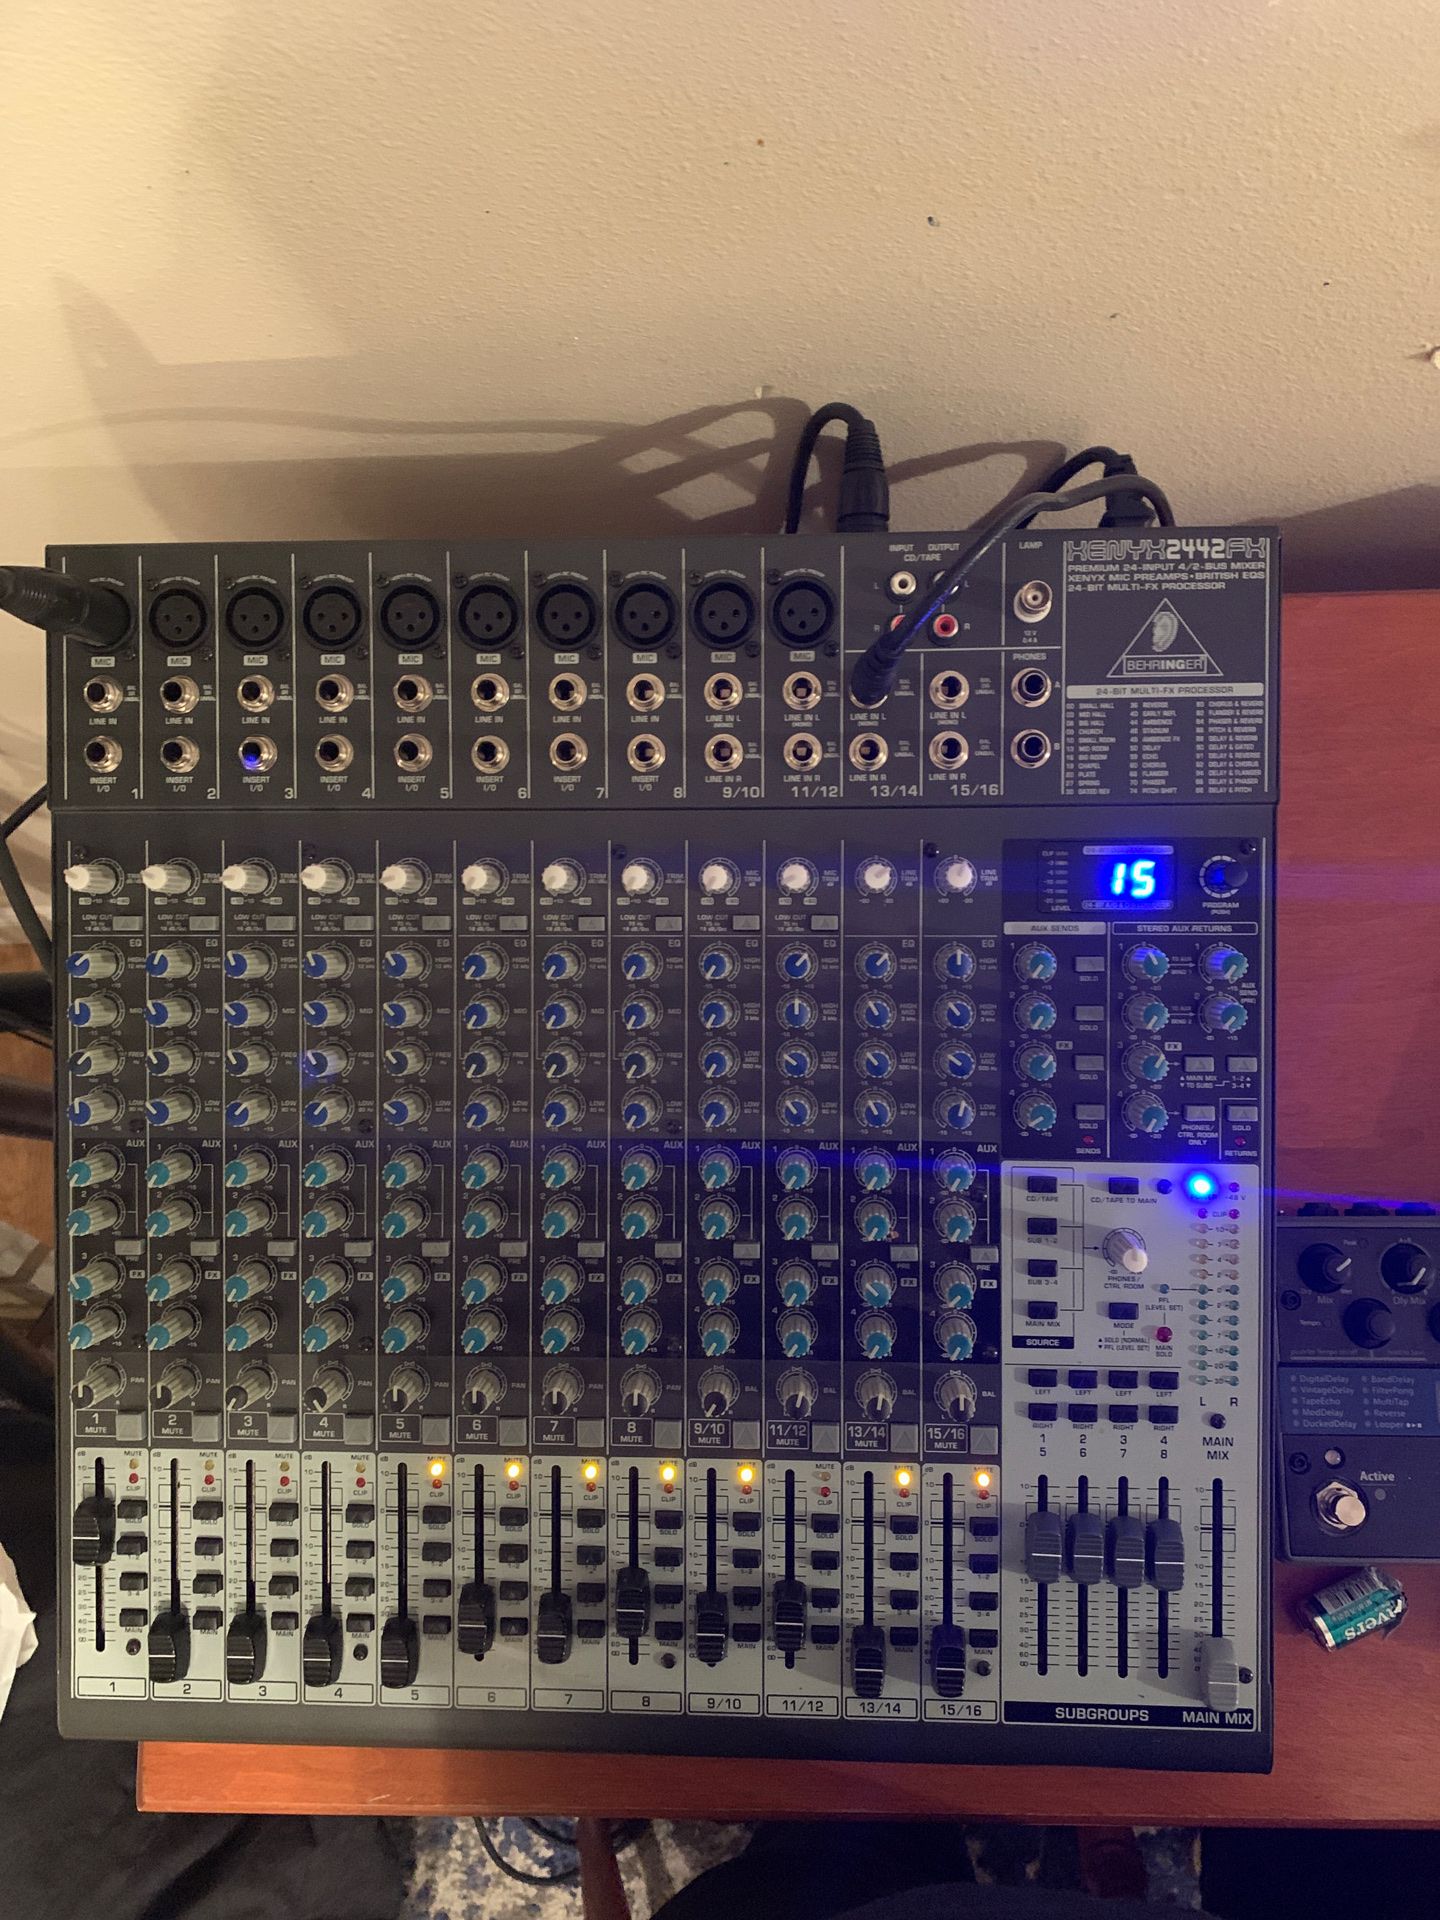 Behringer mixer in great condition $180 obo